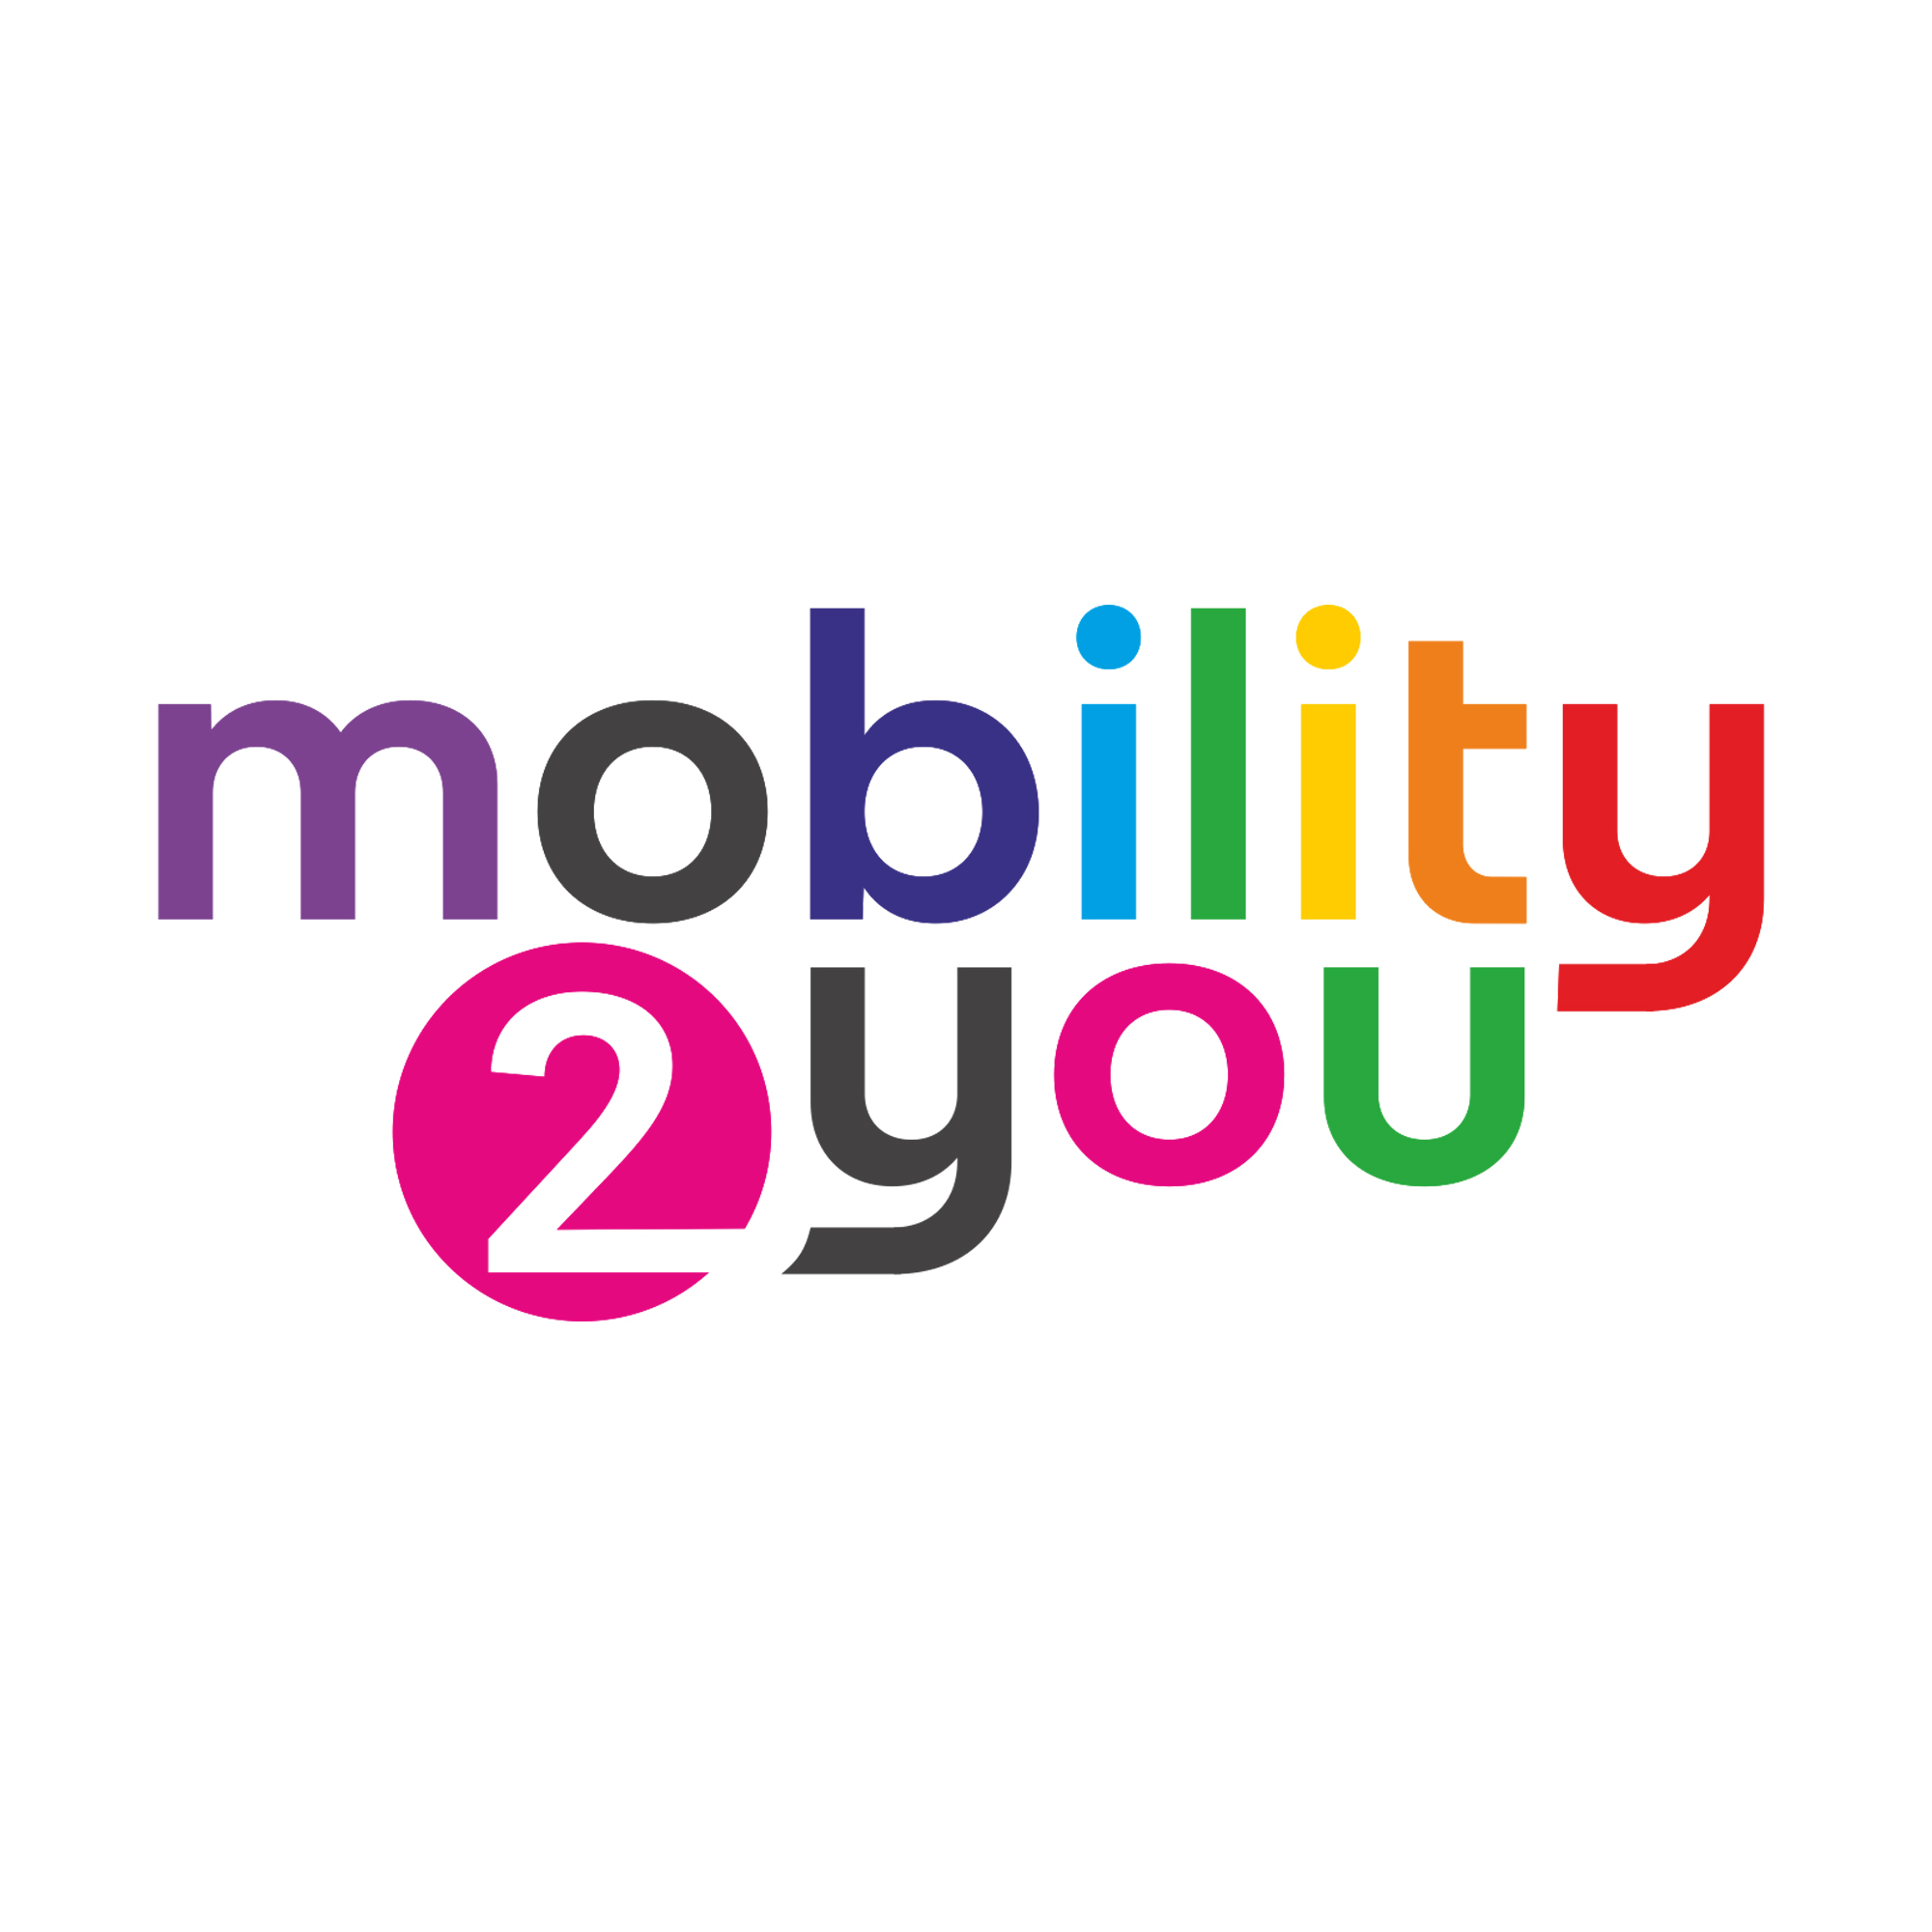 Buy Mobility Aids and Equipment Online - Mobility2You 